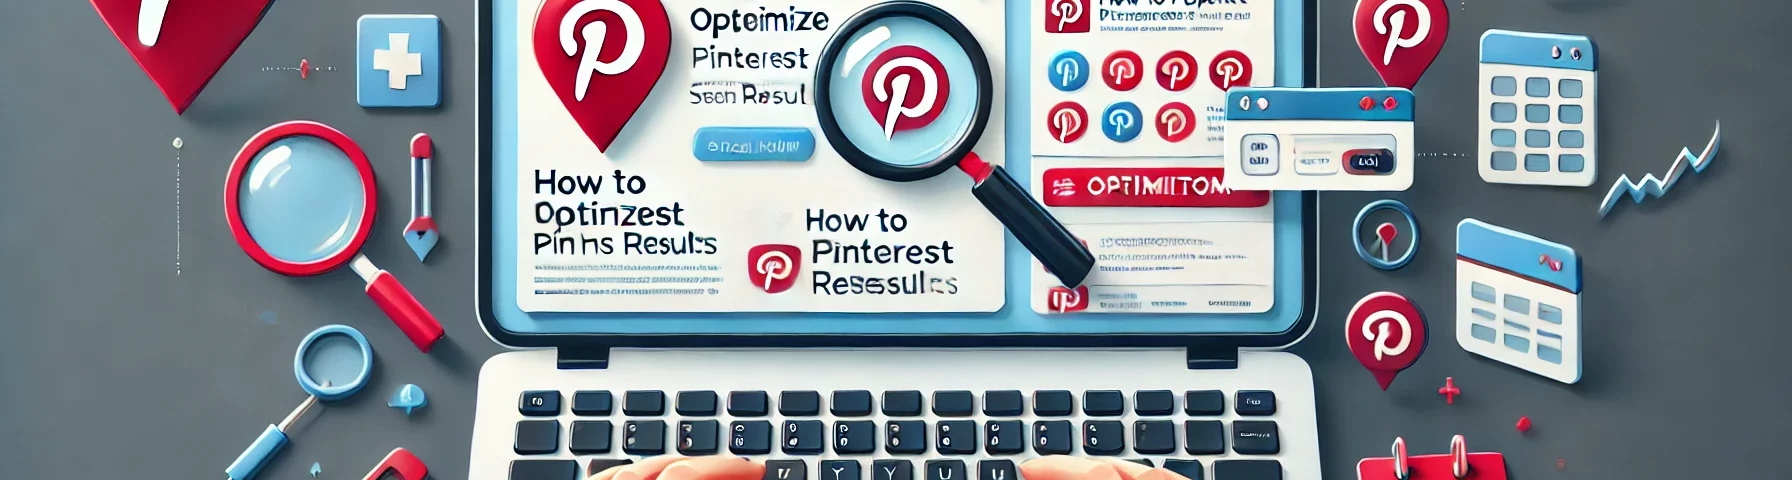 how to optimize pinterest pins